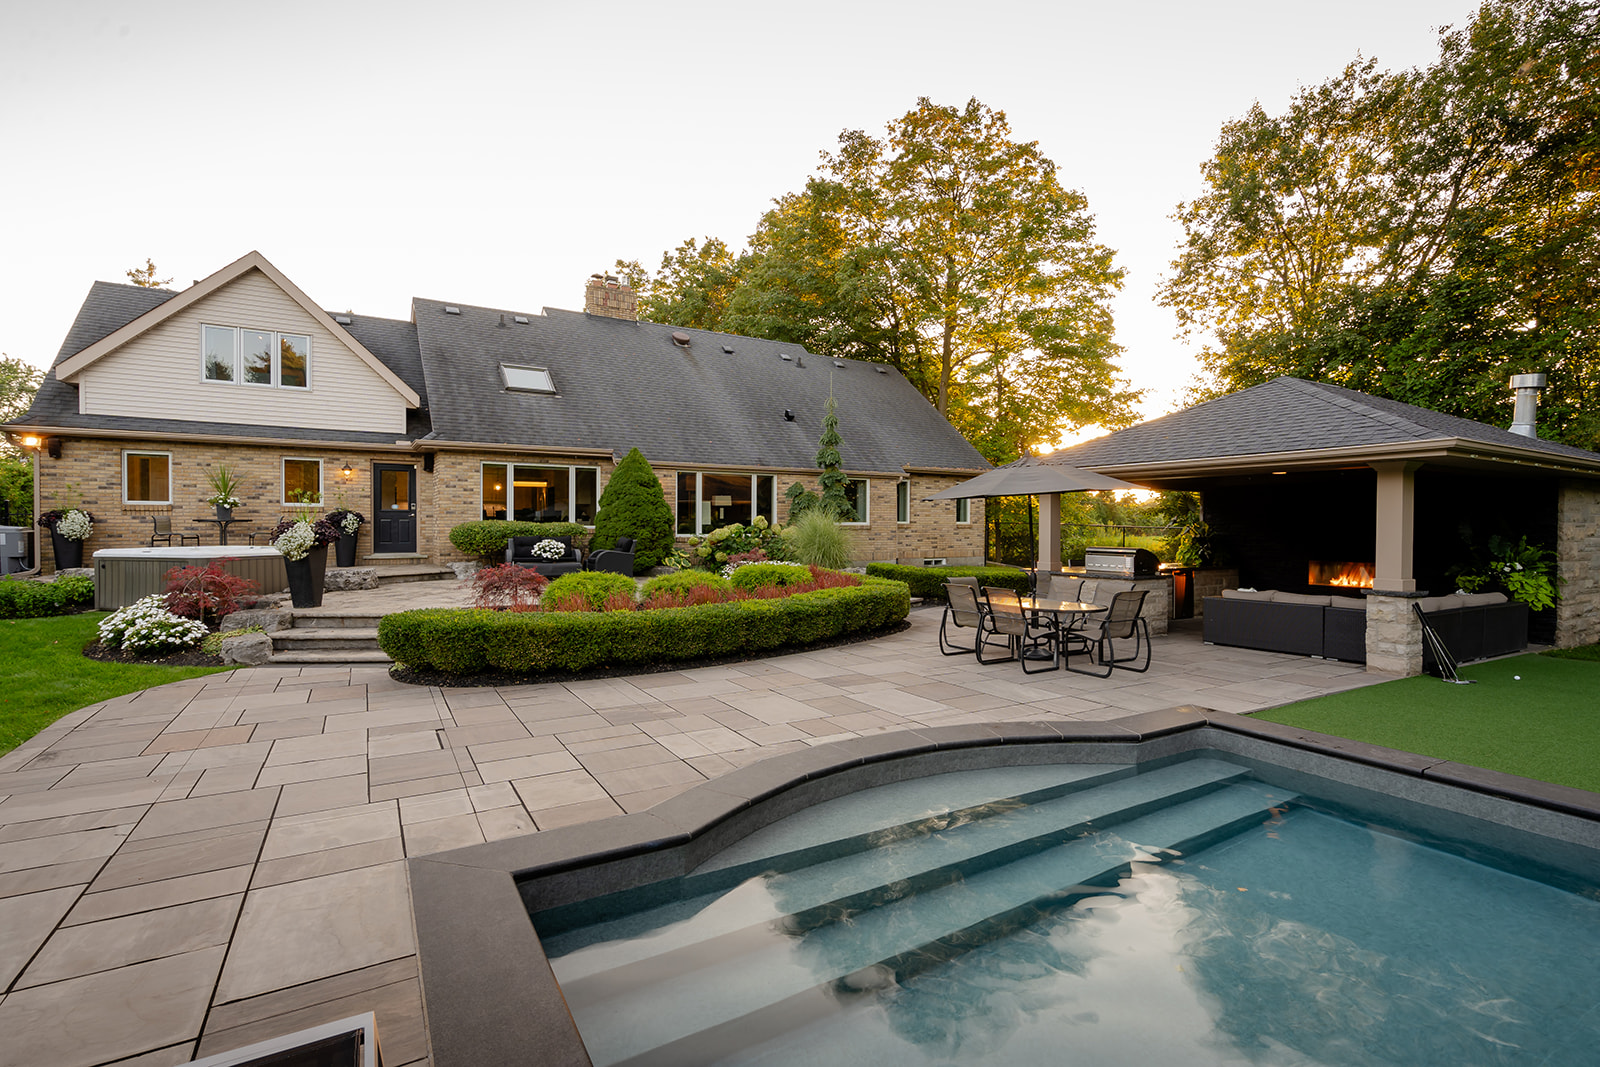 An inground pool with an outdoor patio set with the house in the background.